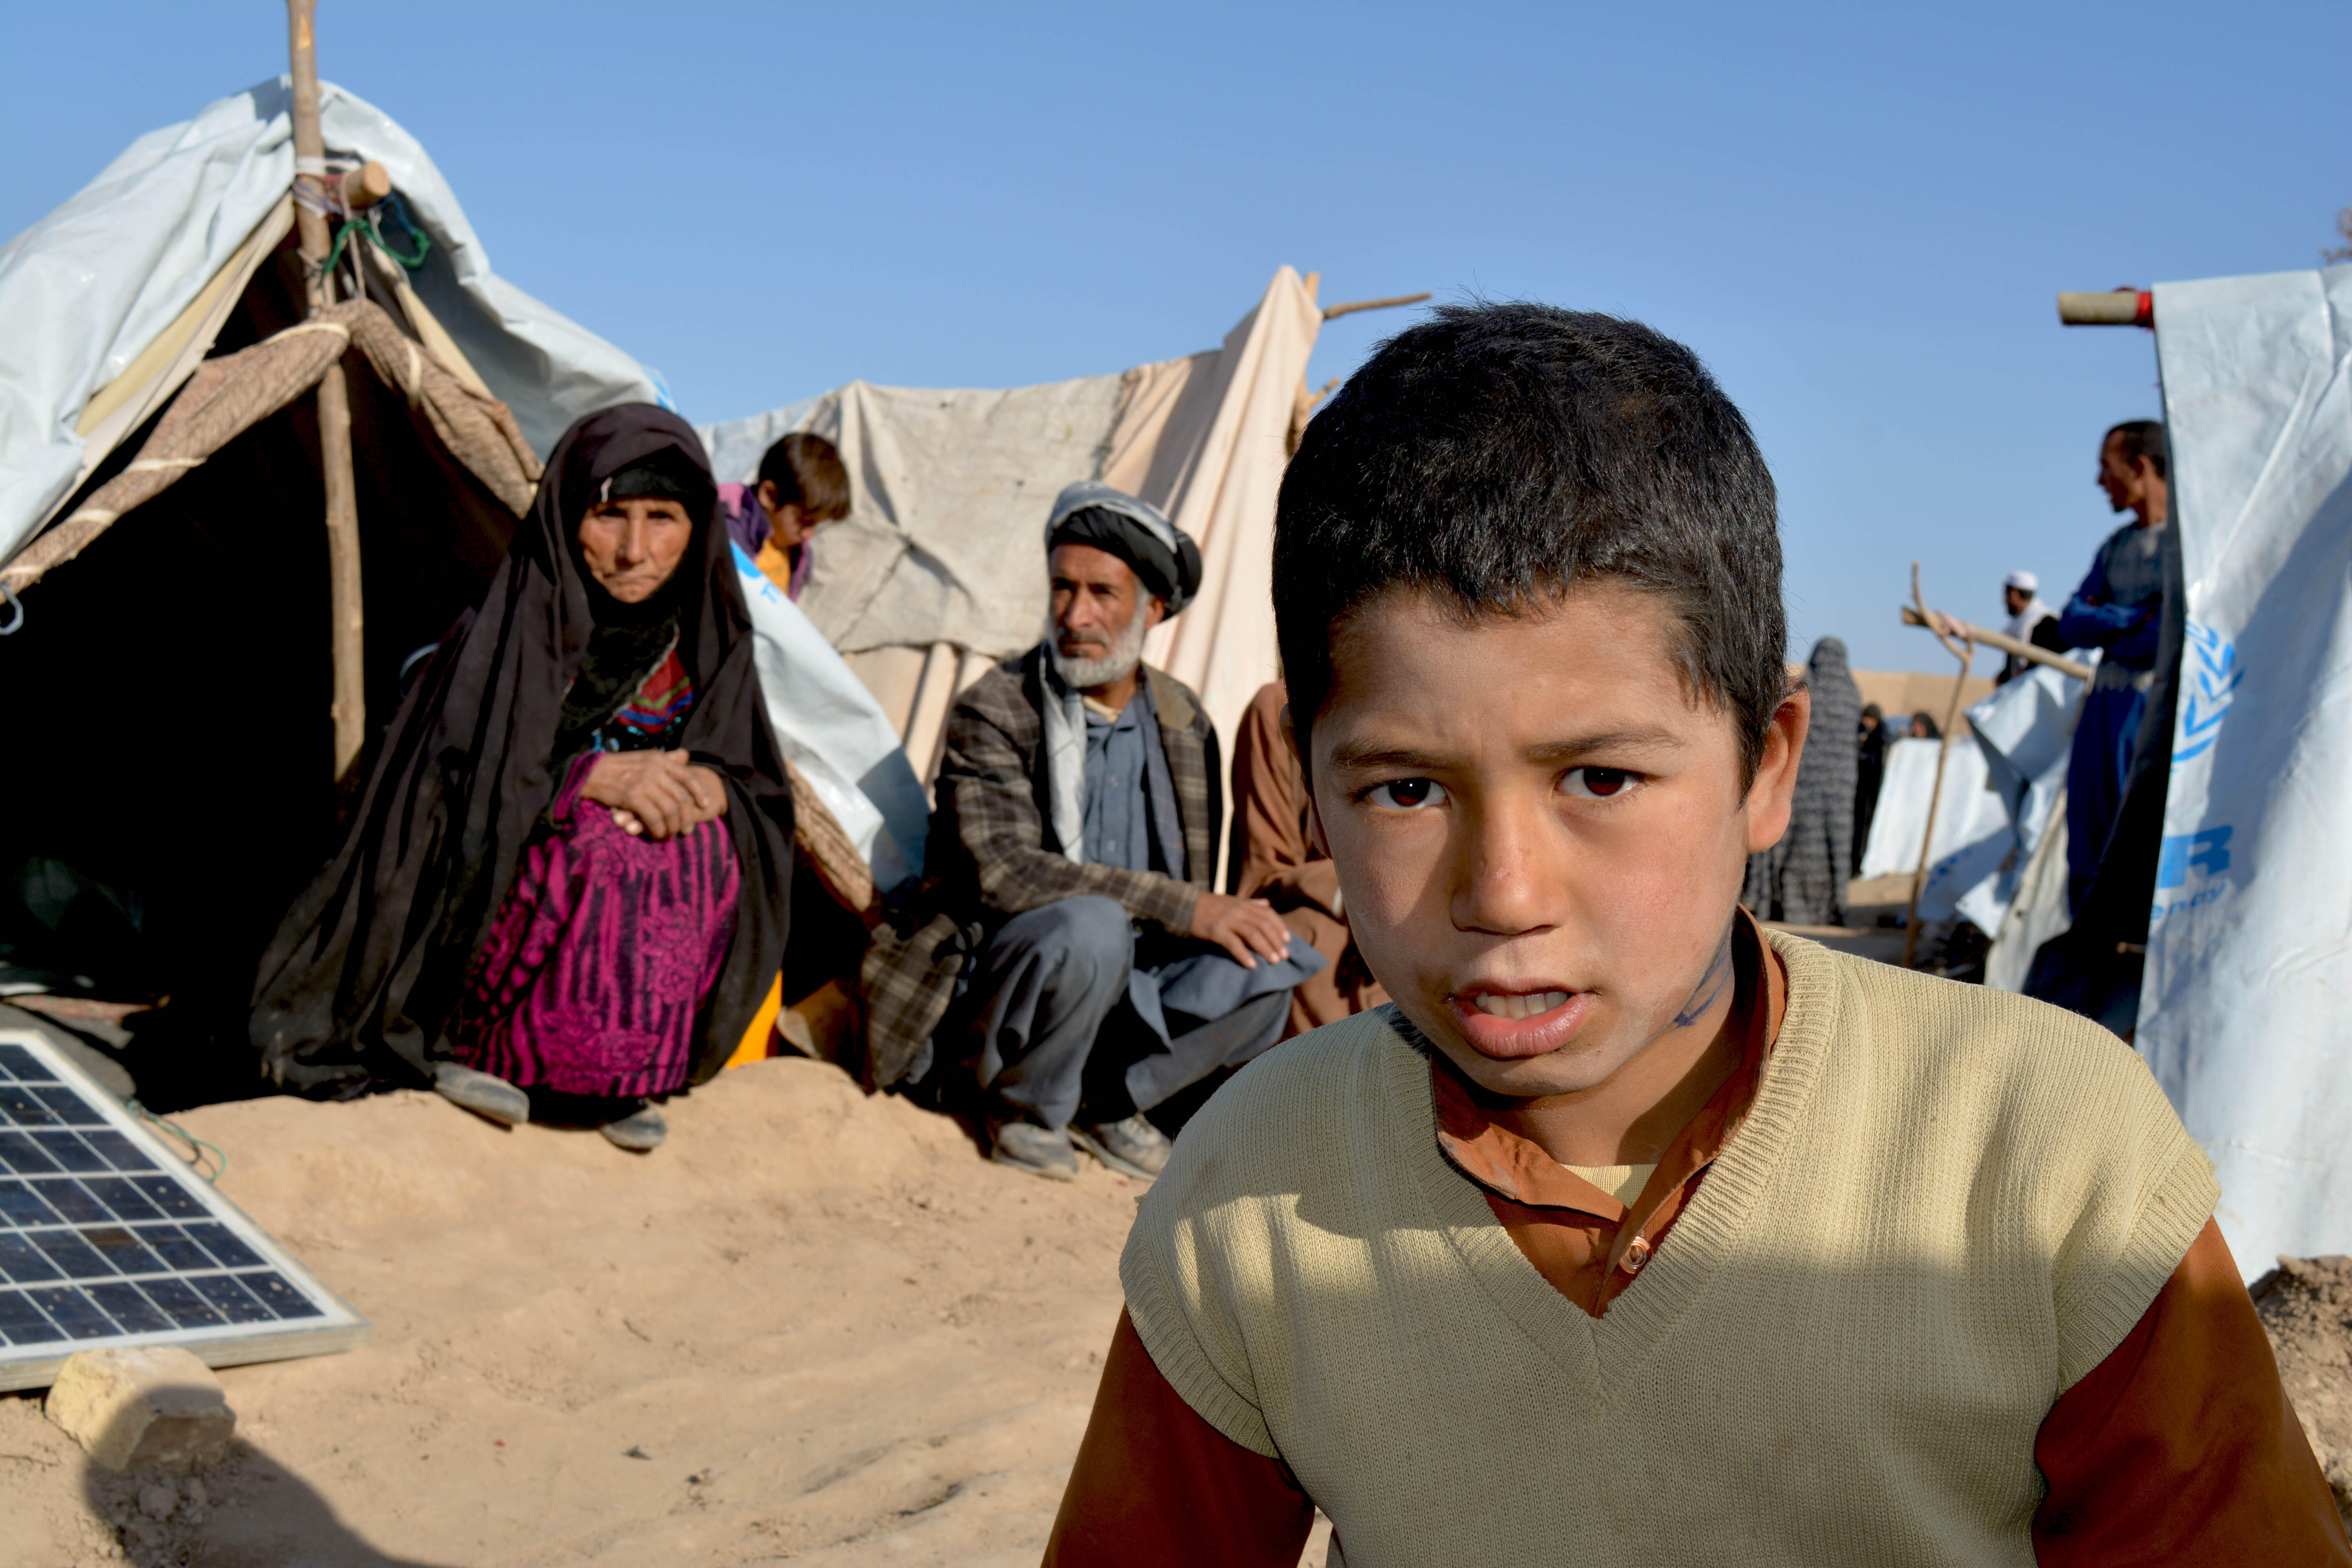 A boy leans toward the camera as an elderly man and woman sit on the sand in front of their tent in a camp for displaced families in Afghanistan.